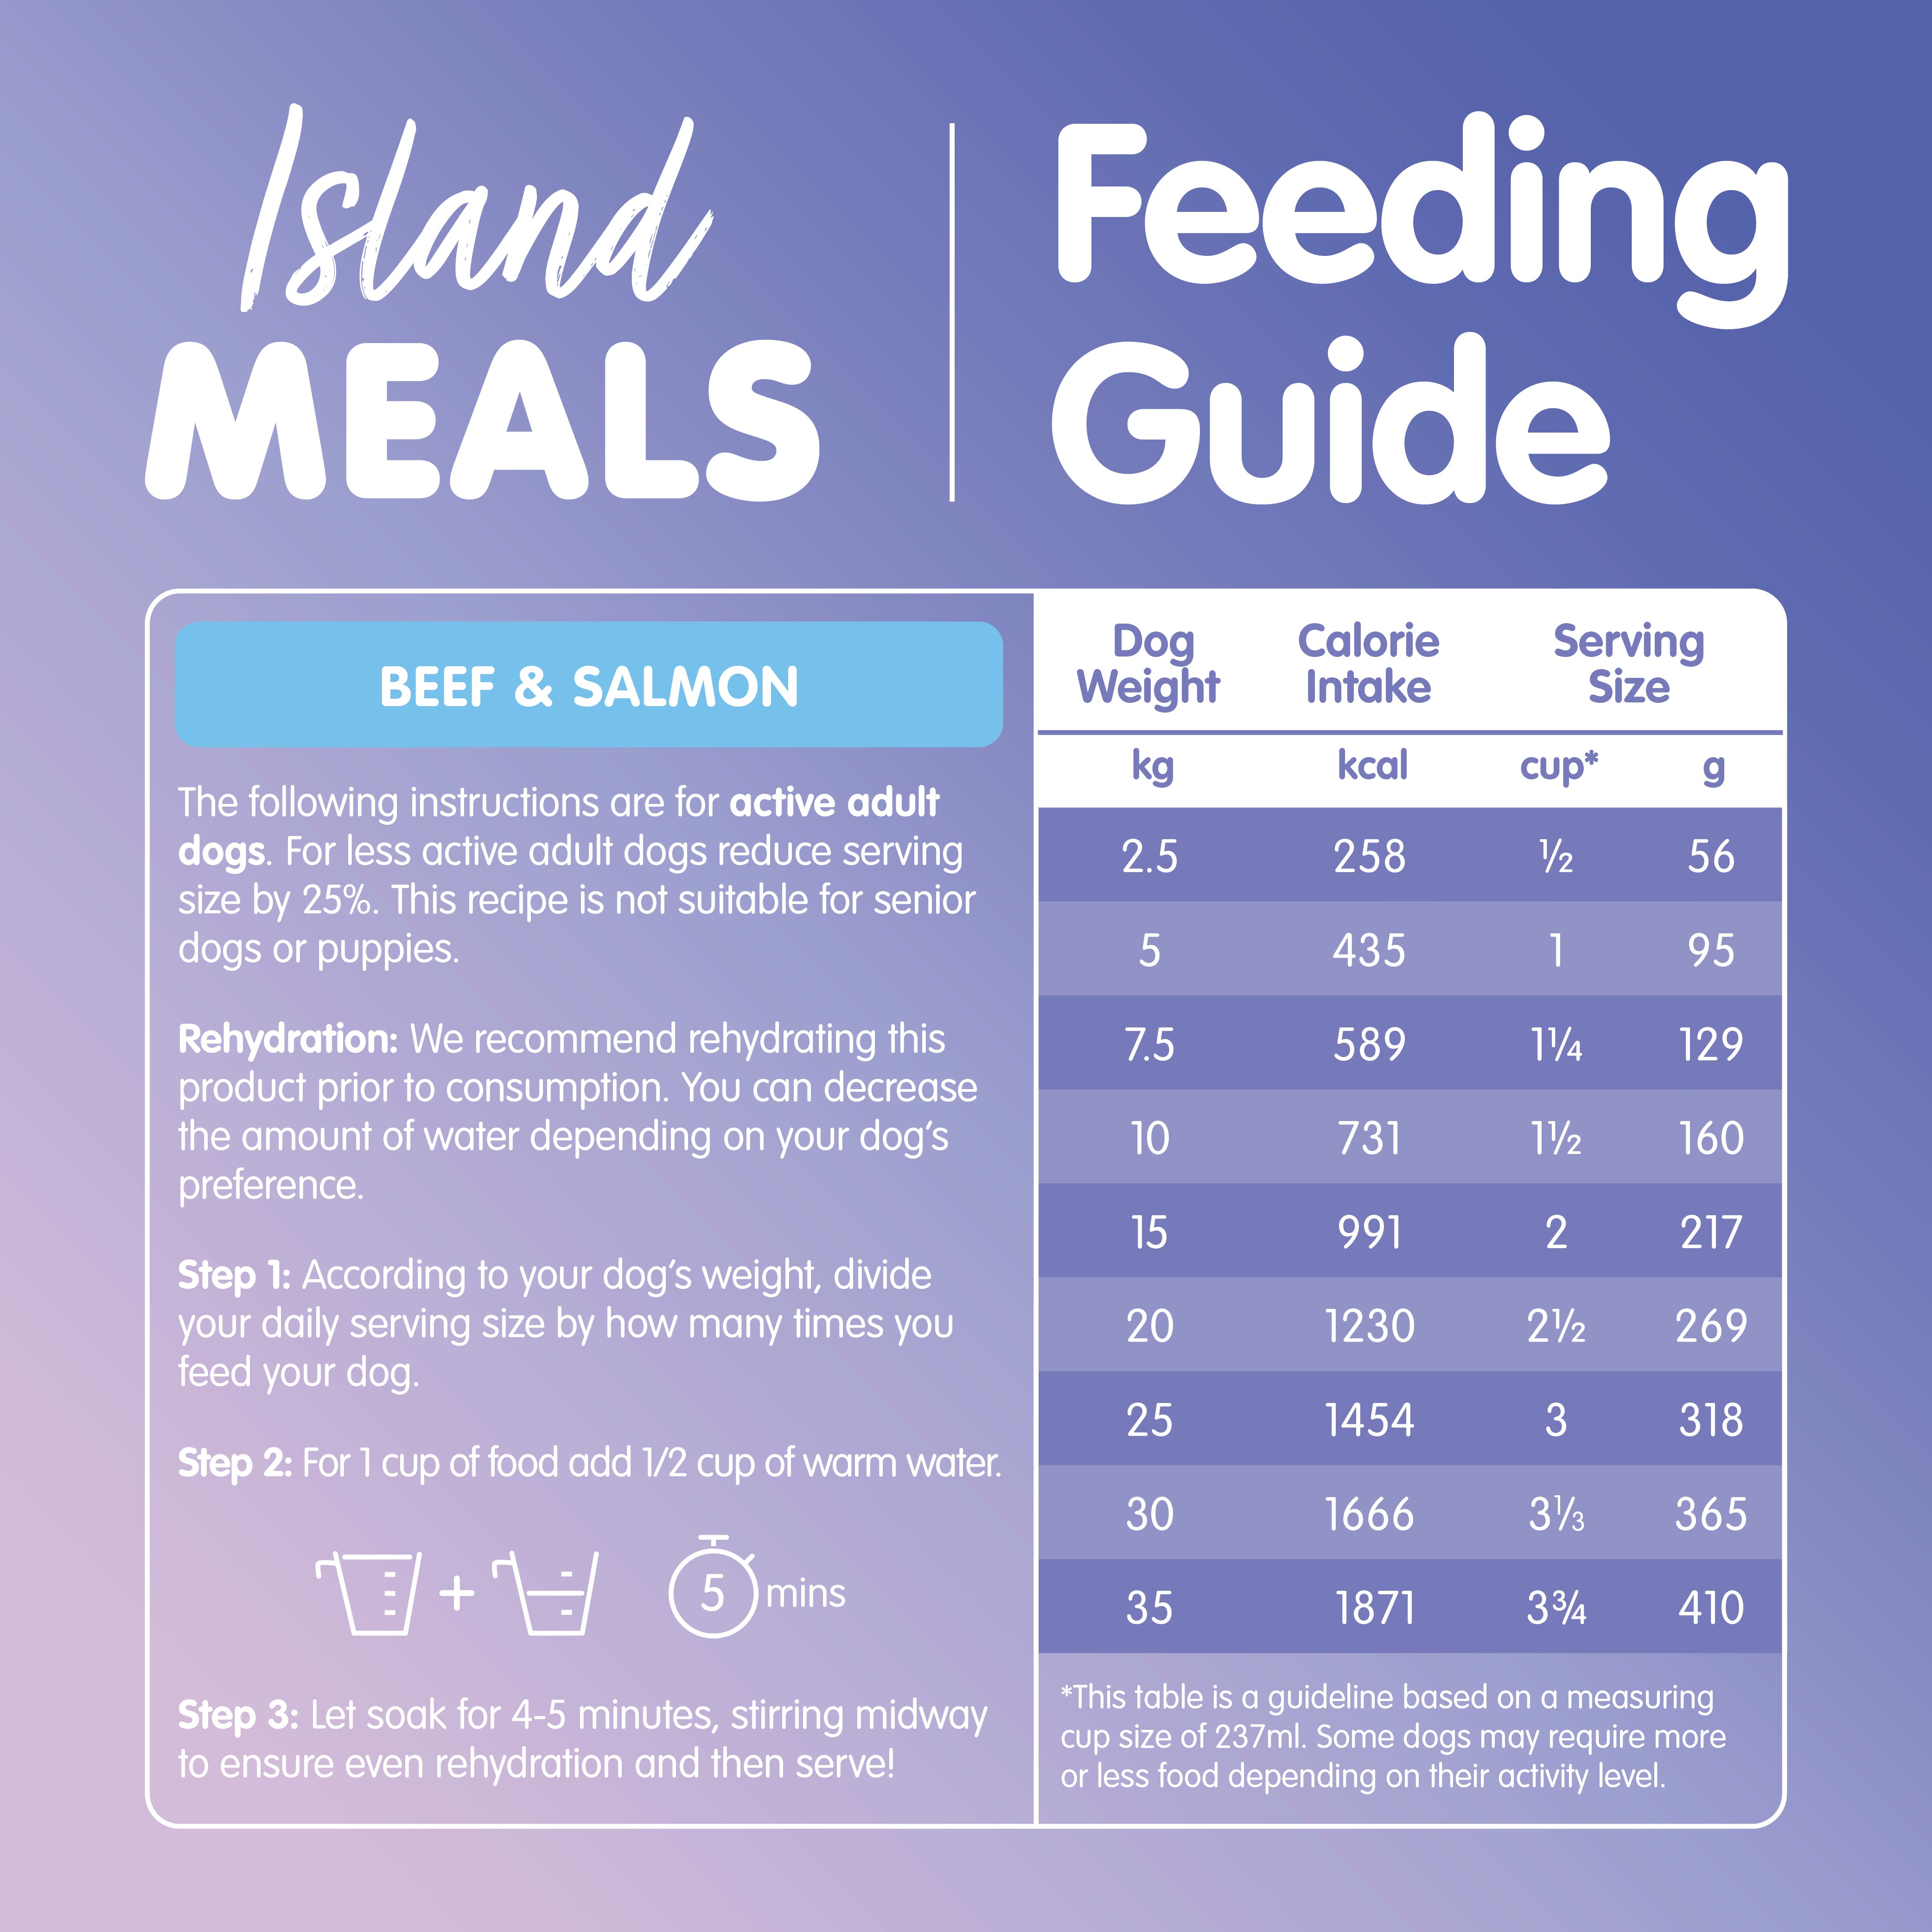 Island Meals – Beef and Salmon (Dehydrated)